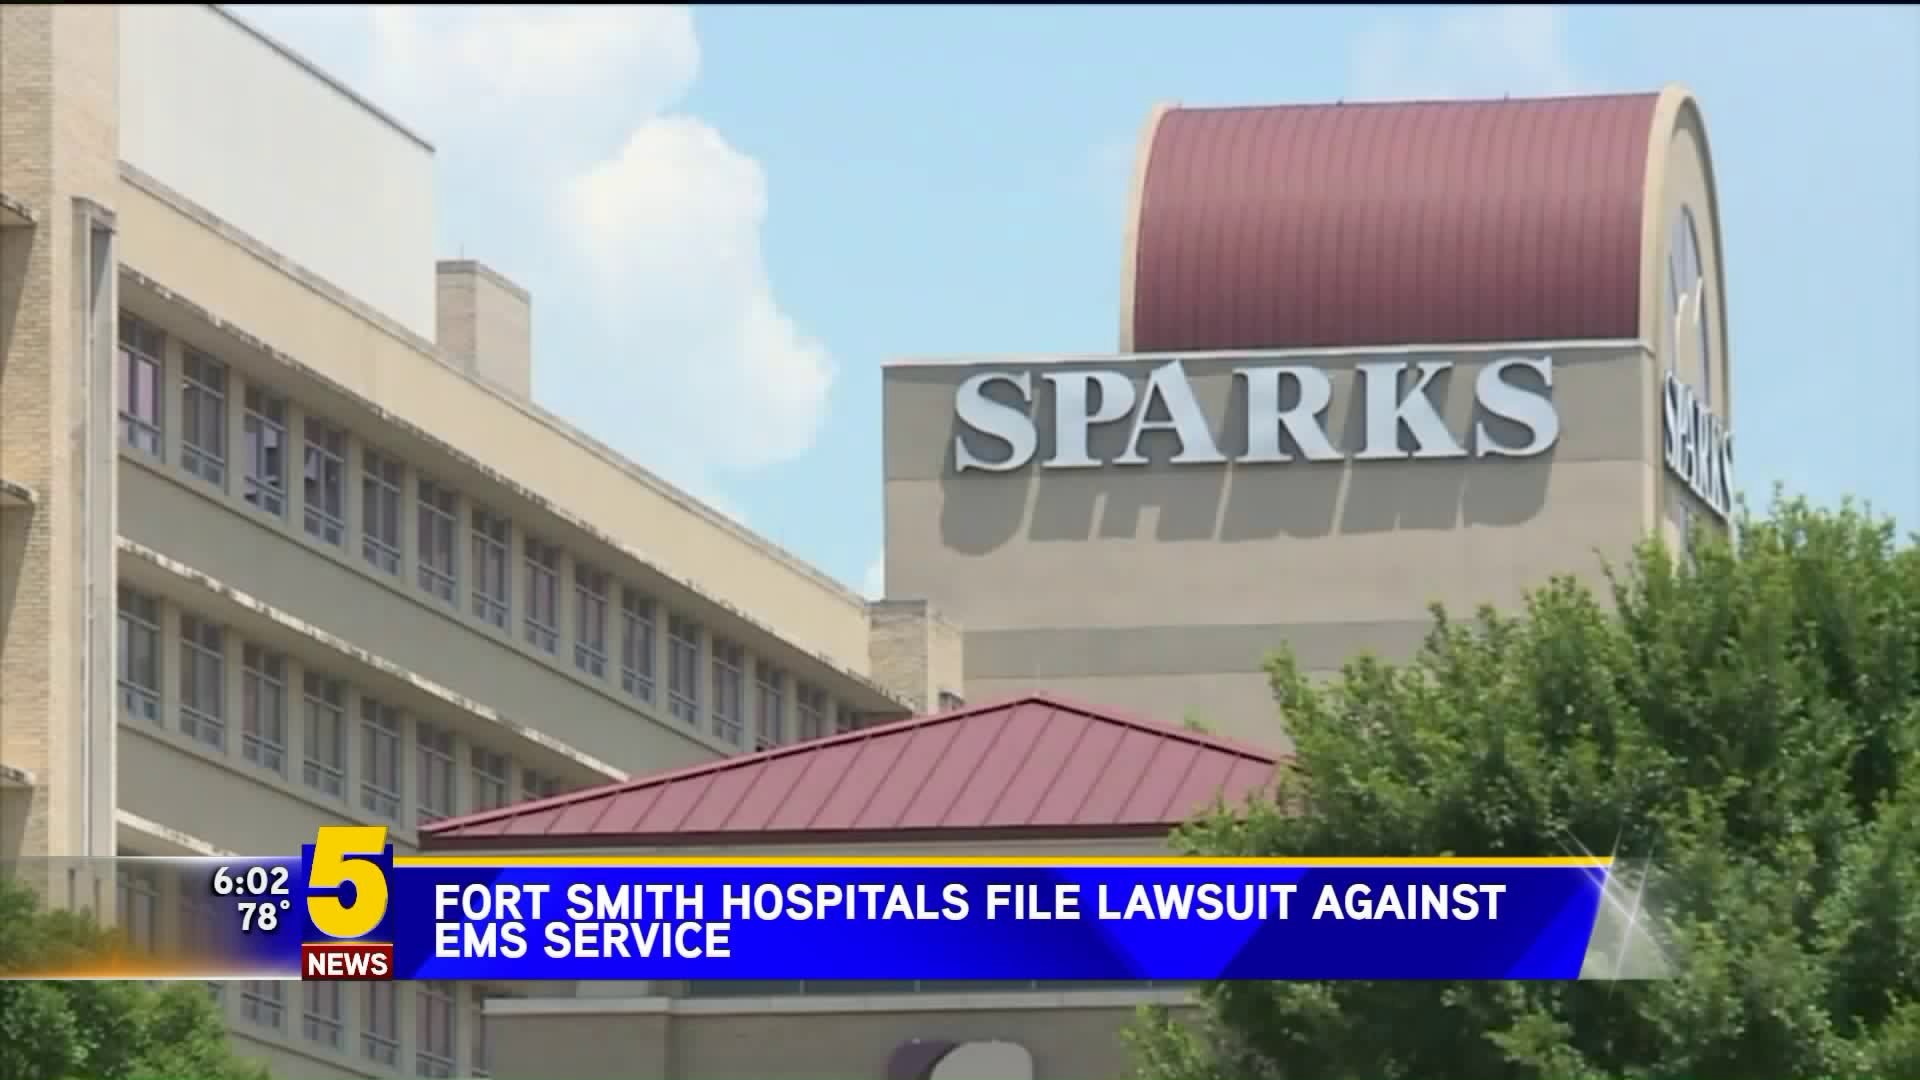 Fort Smith Hospitals File Lawsuit Against EMS Service